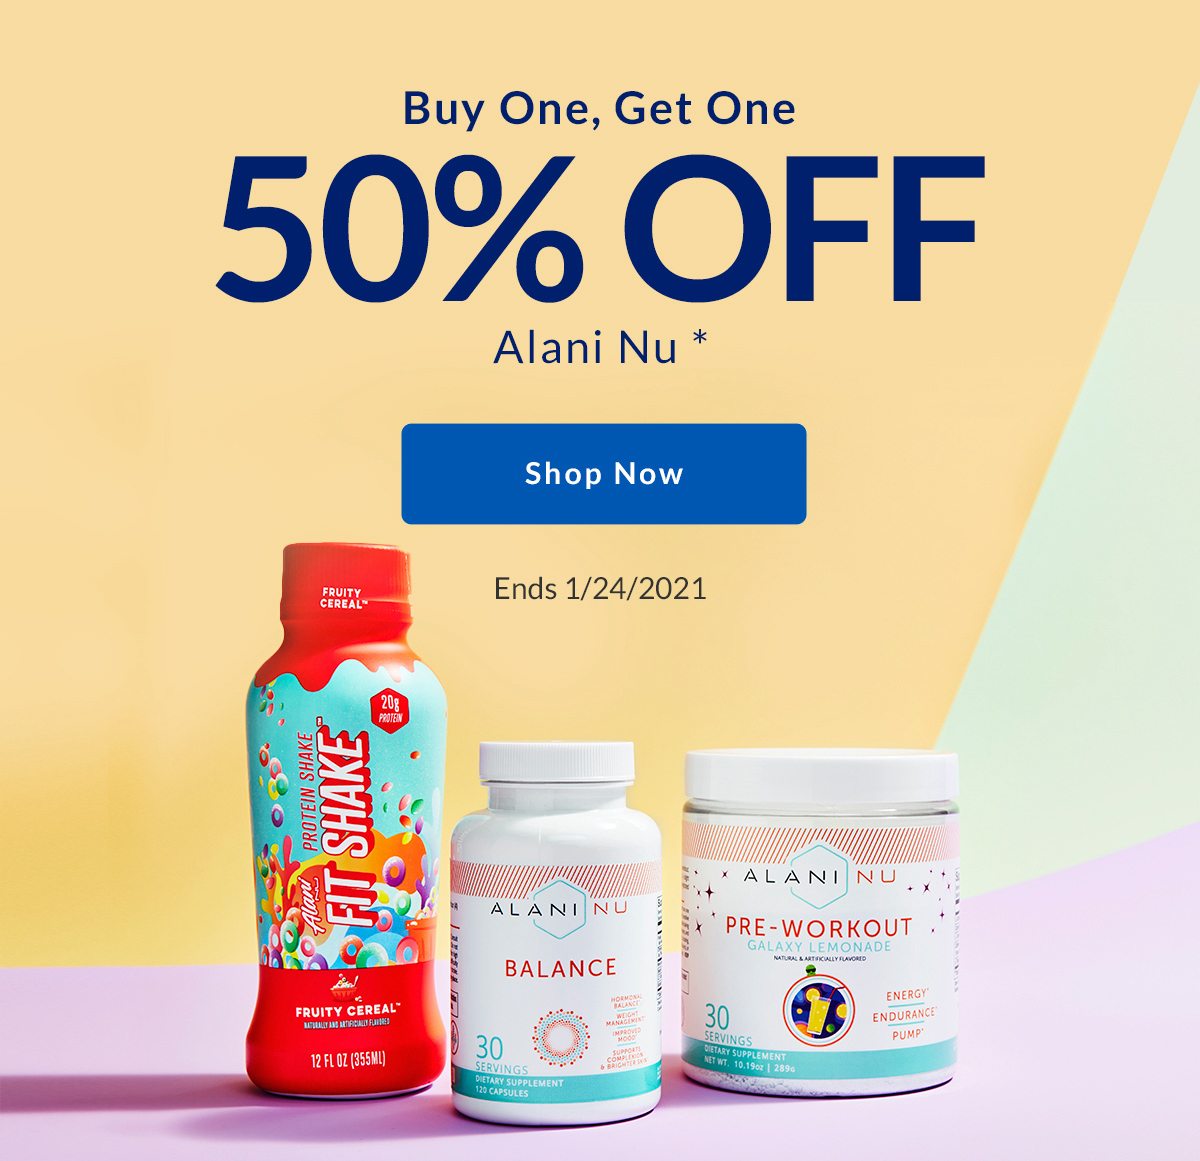 Buy One, Get One 50% OFF Alani Nu * | Shop Now | Ends 1/24/2021